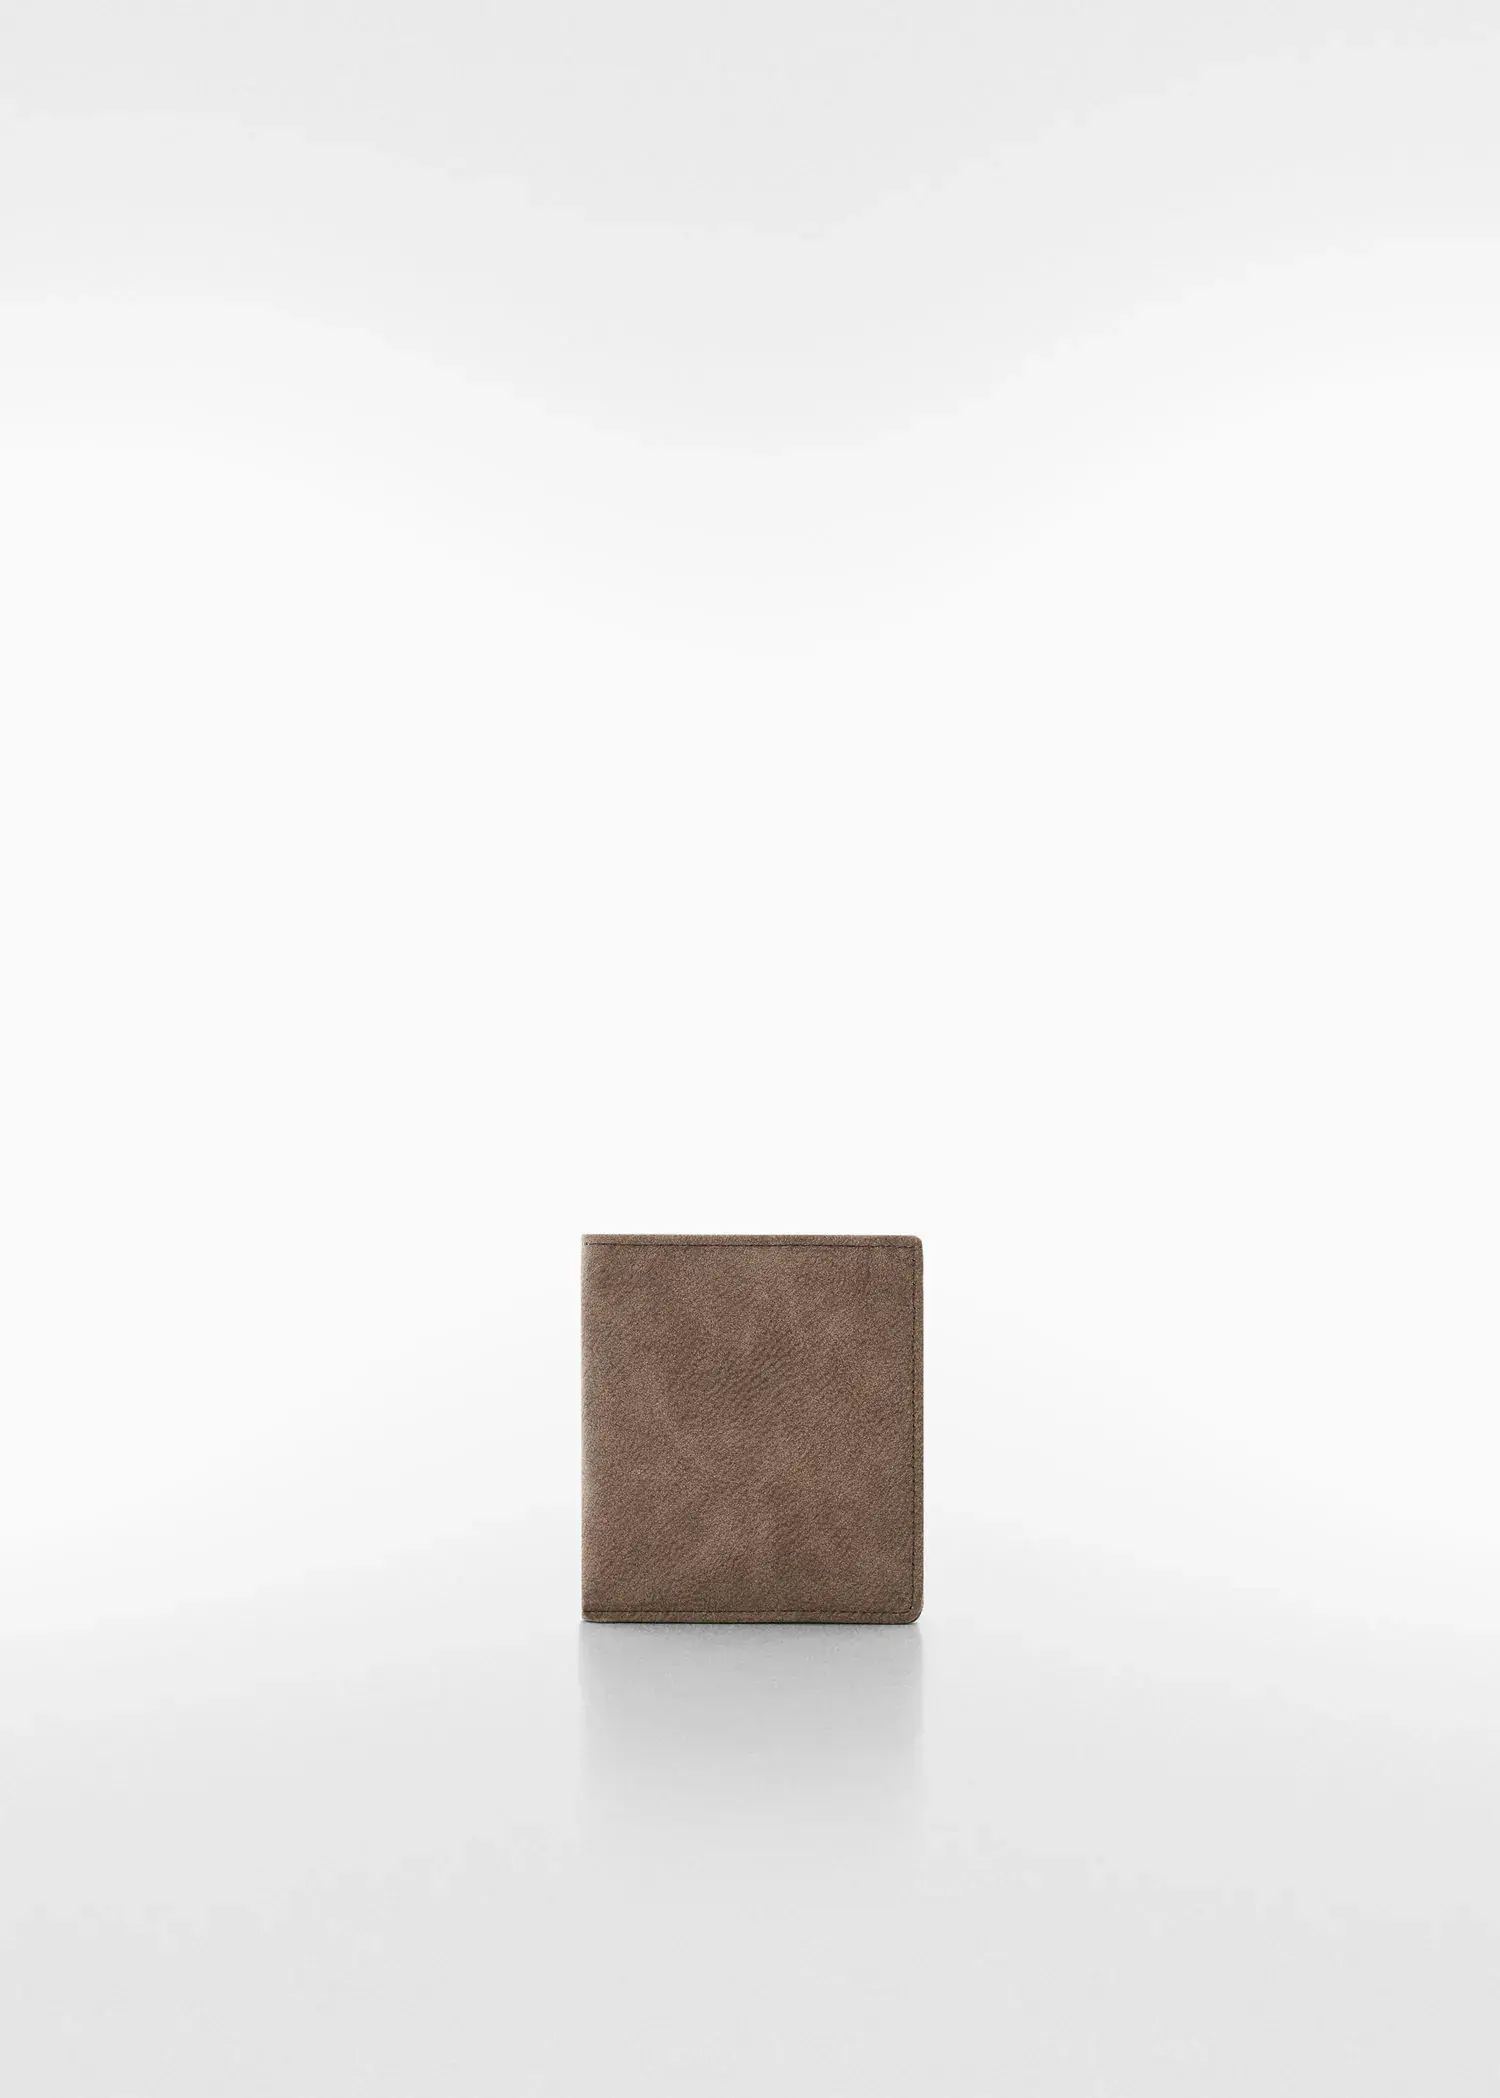 Mango Anti-contactless wallet. a brown wallet sitting on top of a white table. 